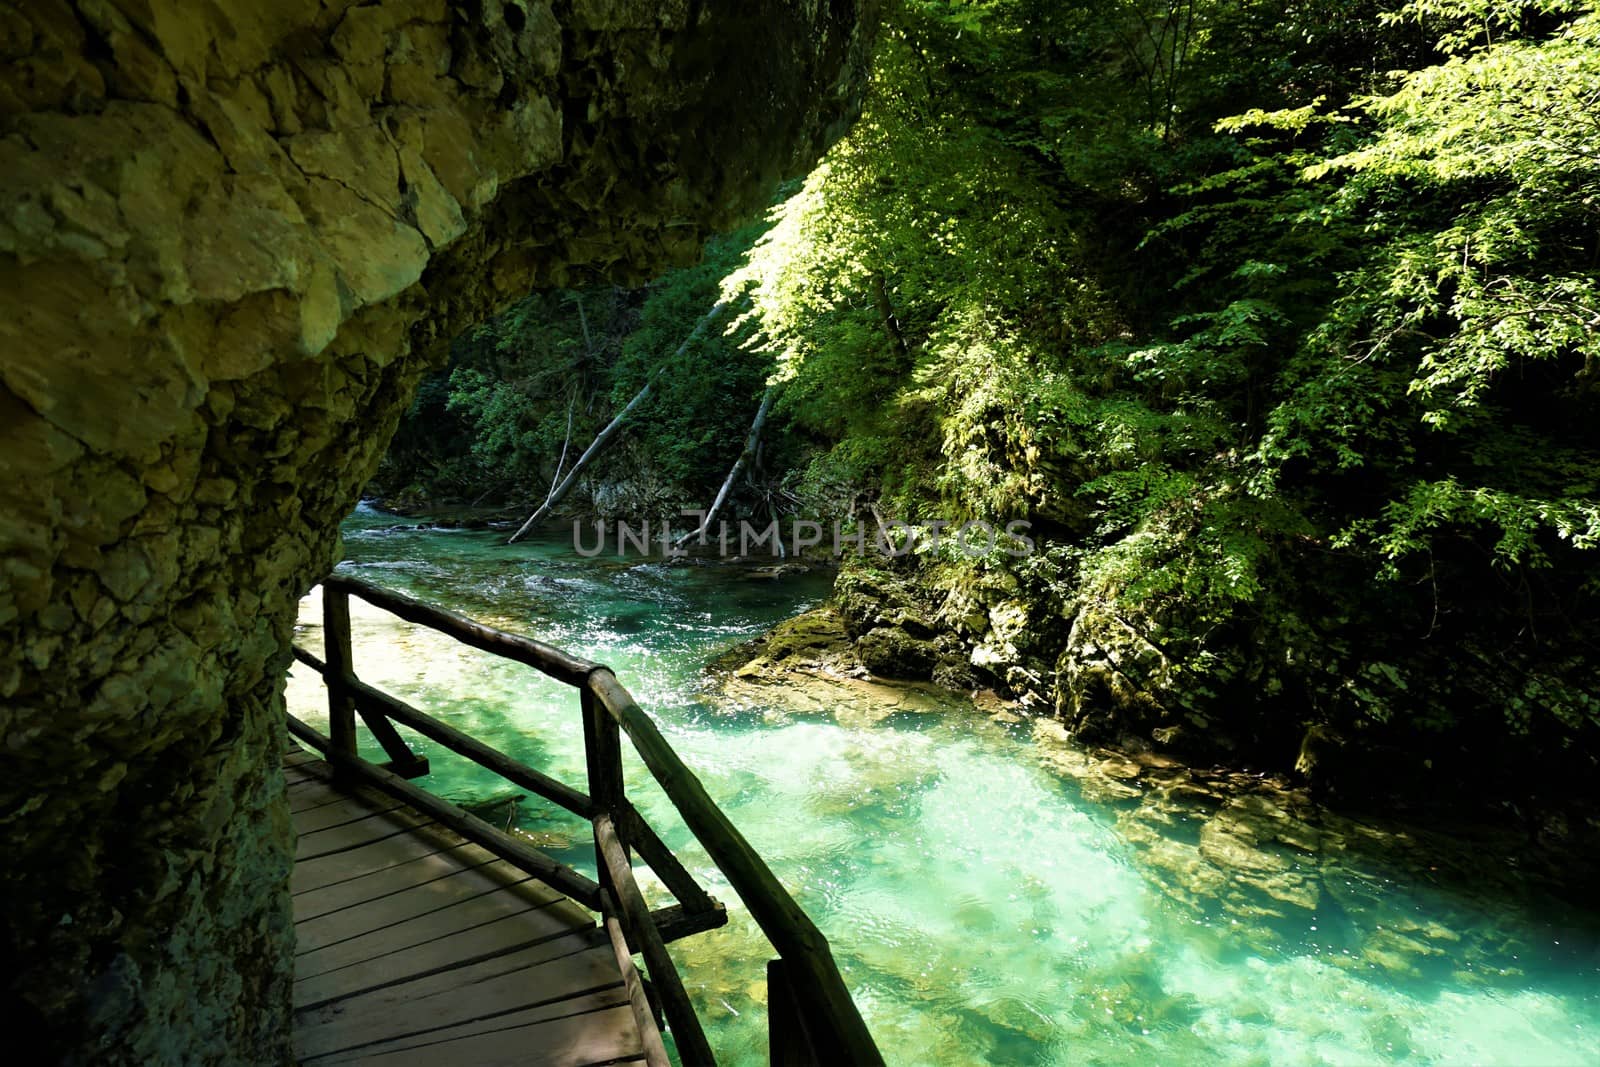 Turquoise Radovna river with wooden path, trees and rock by pisces2386